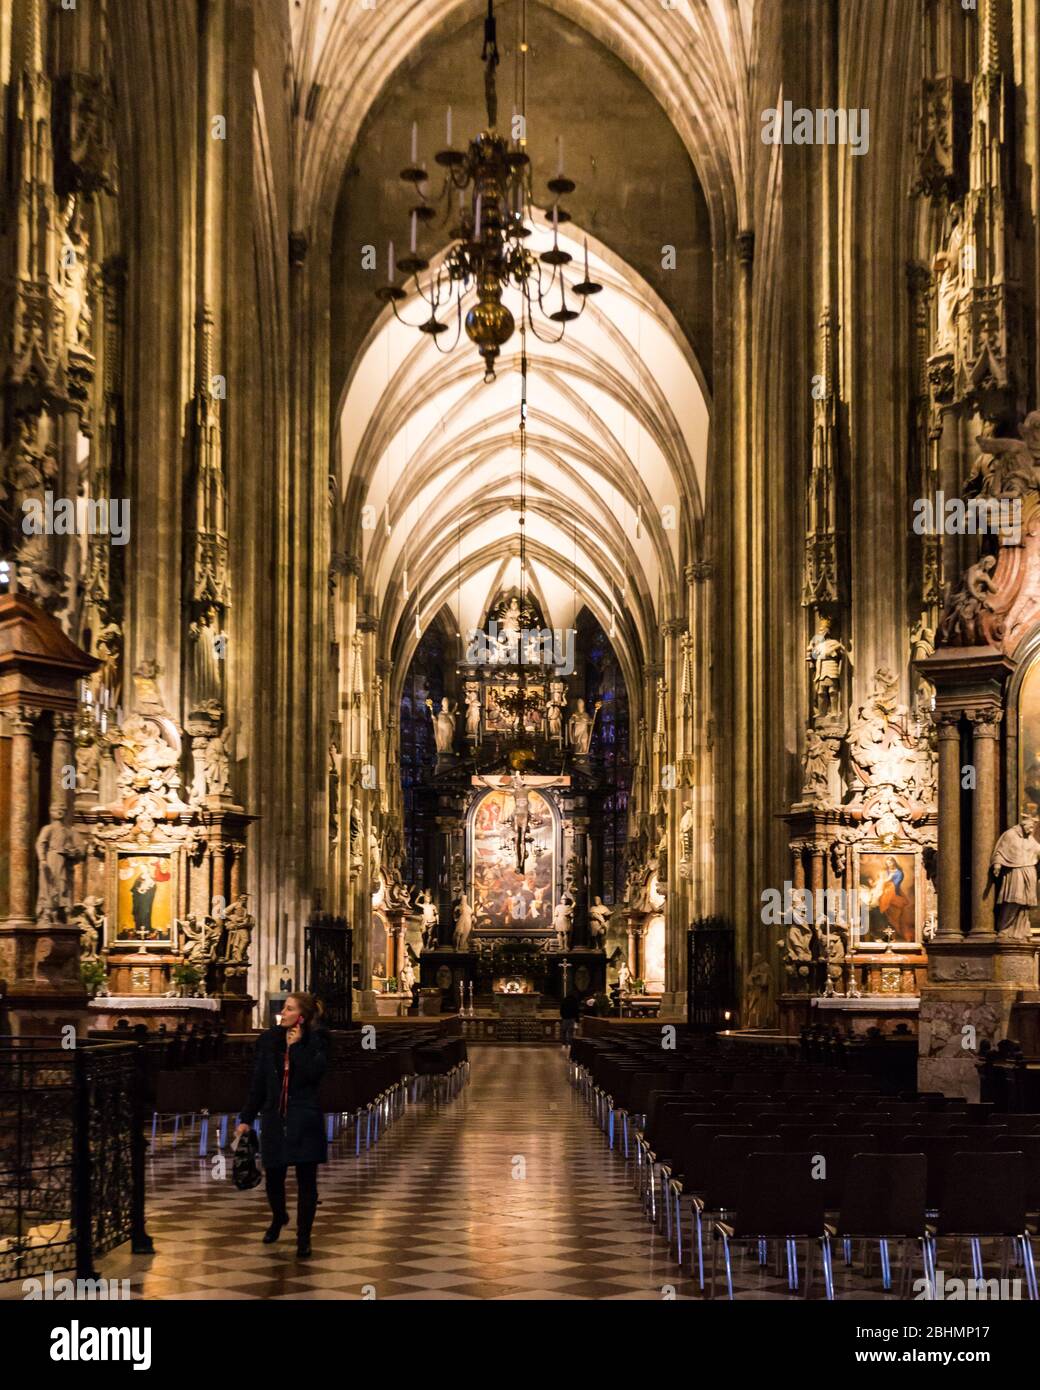 The magnificent St Stephen's Cathedral in Vienna. Dating back to 1137, it is an architectural masterpiece of the Middle Ages. Stock Photo